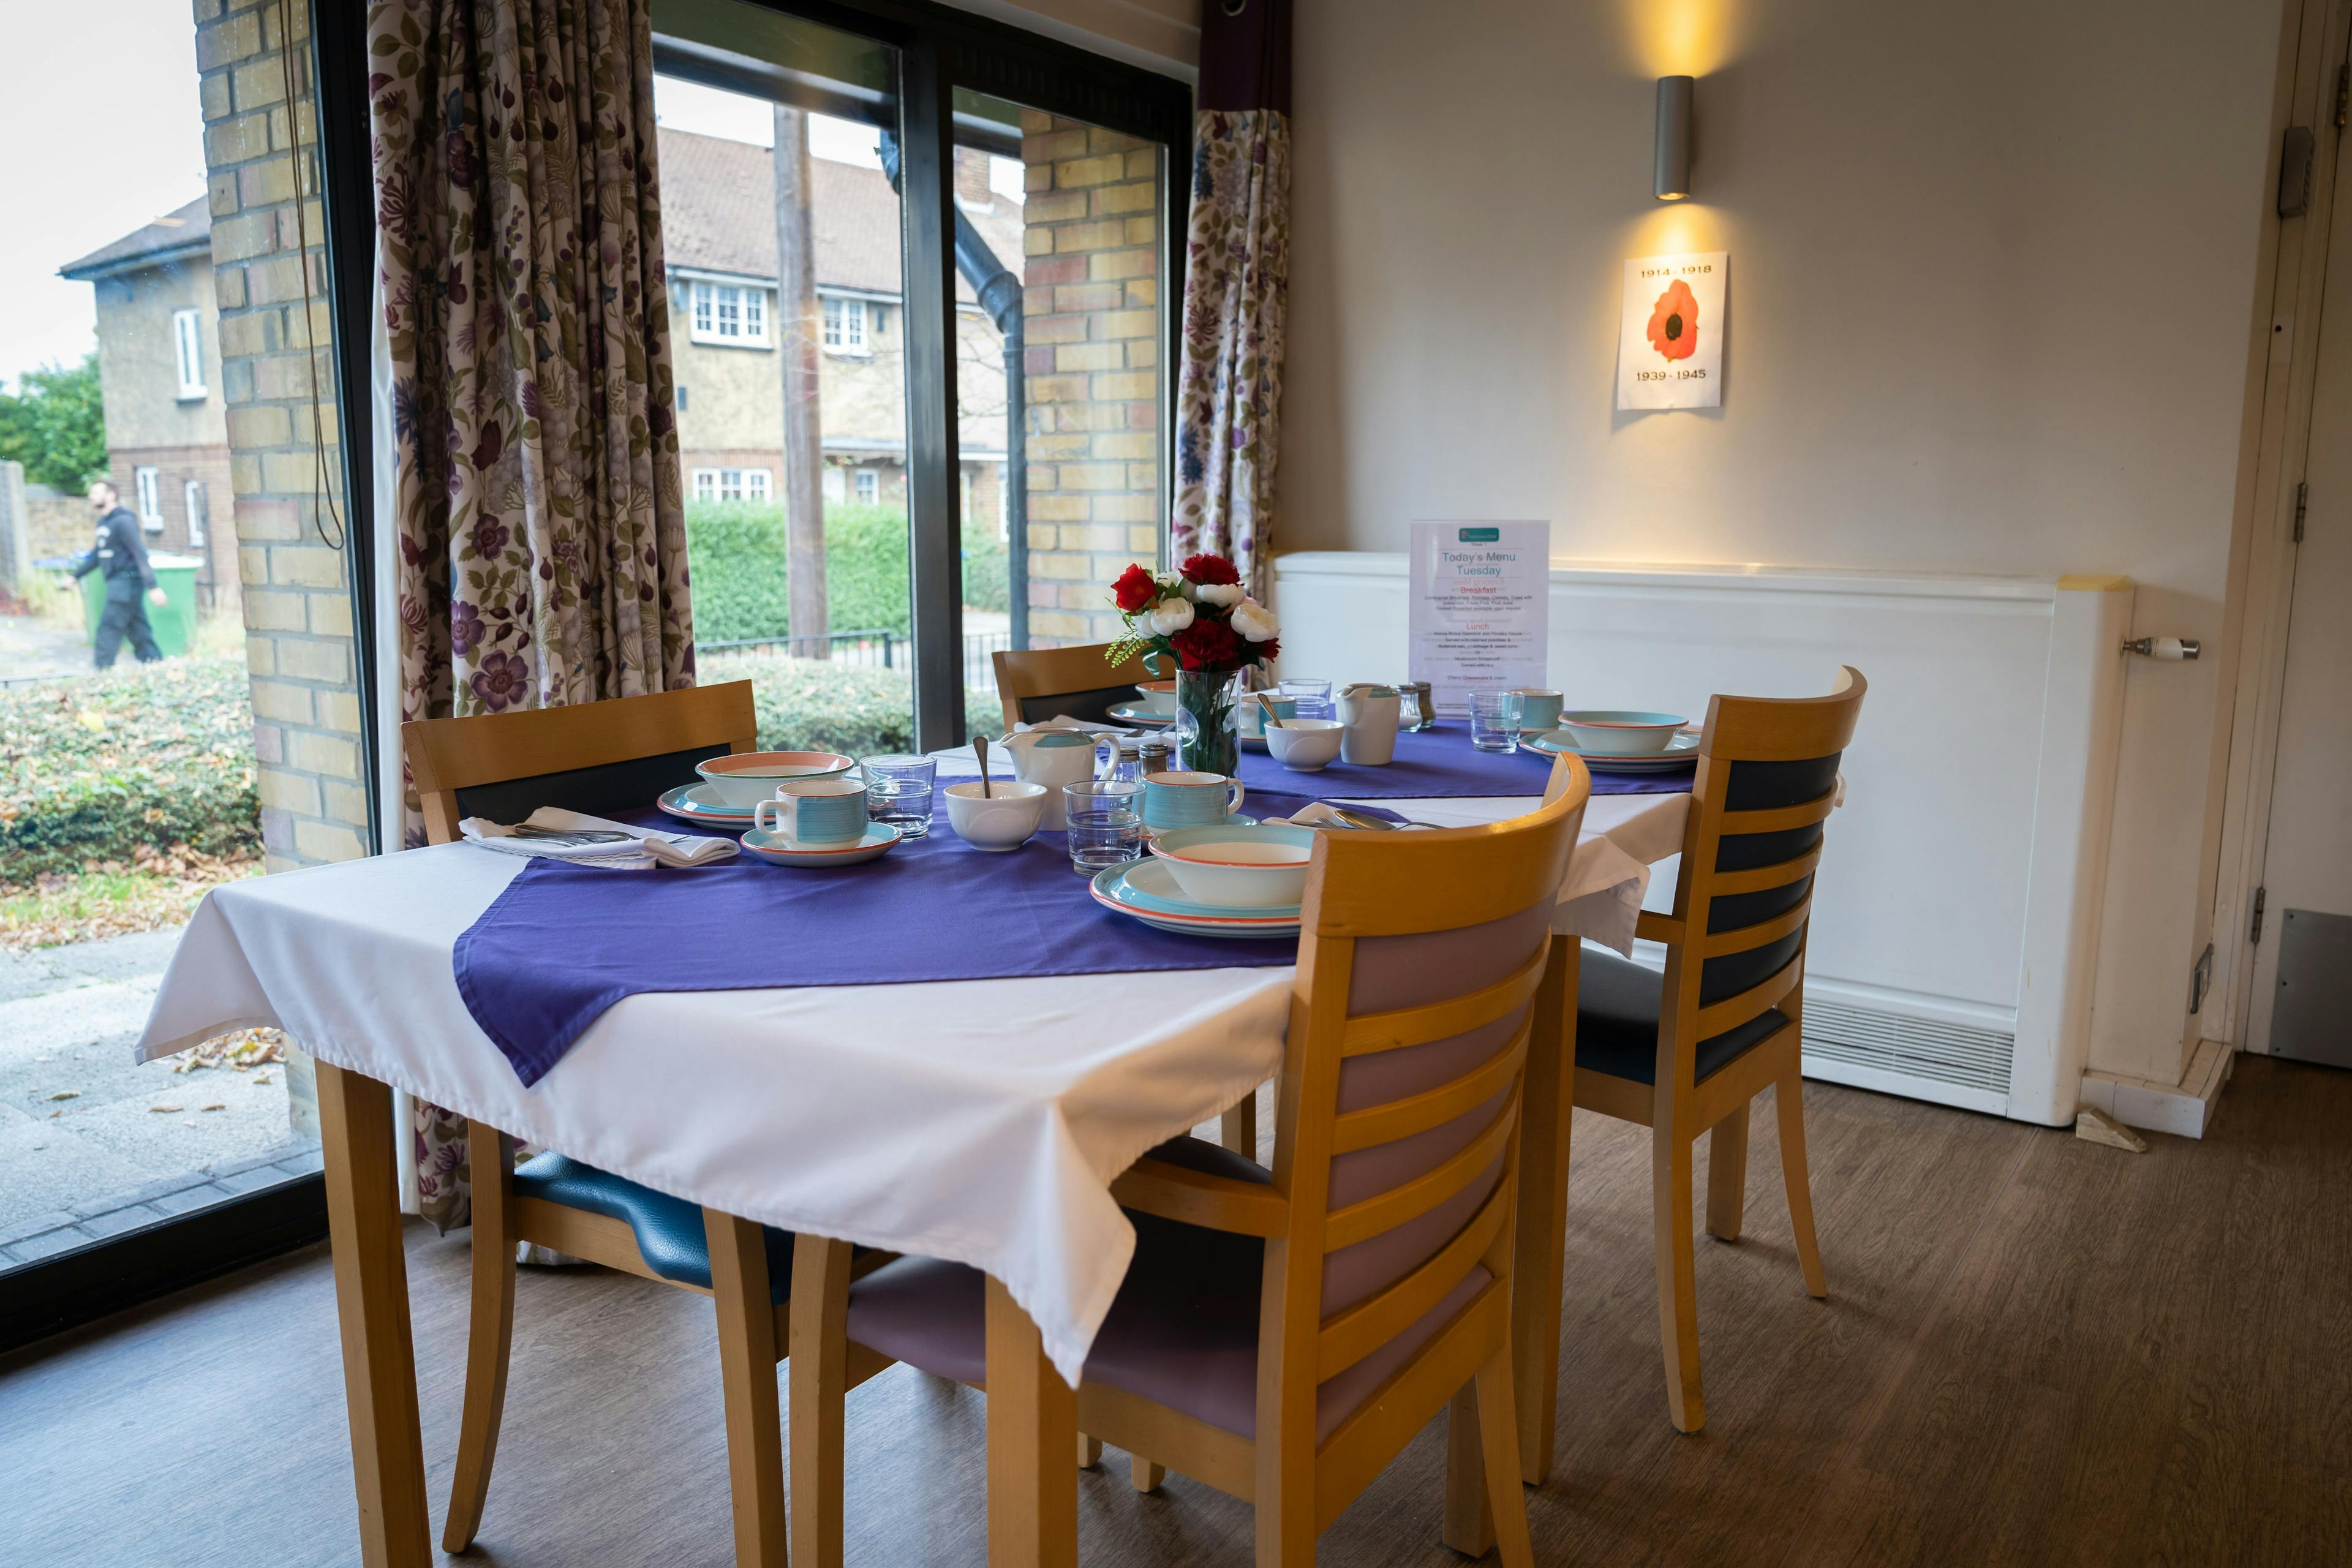 Dining Area at Shaftesbury Court, Erith, Kent